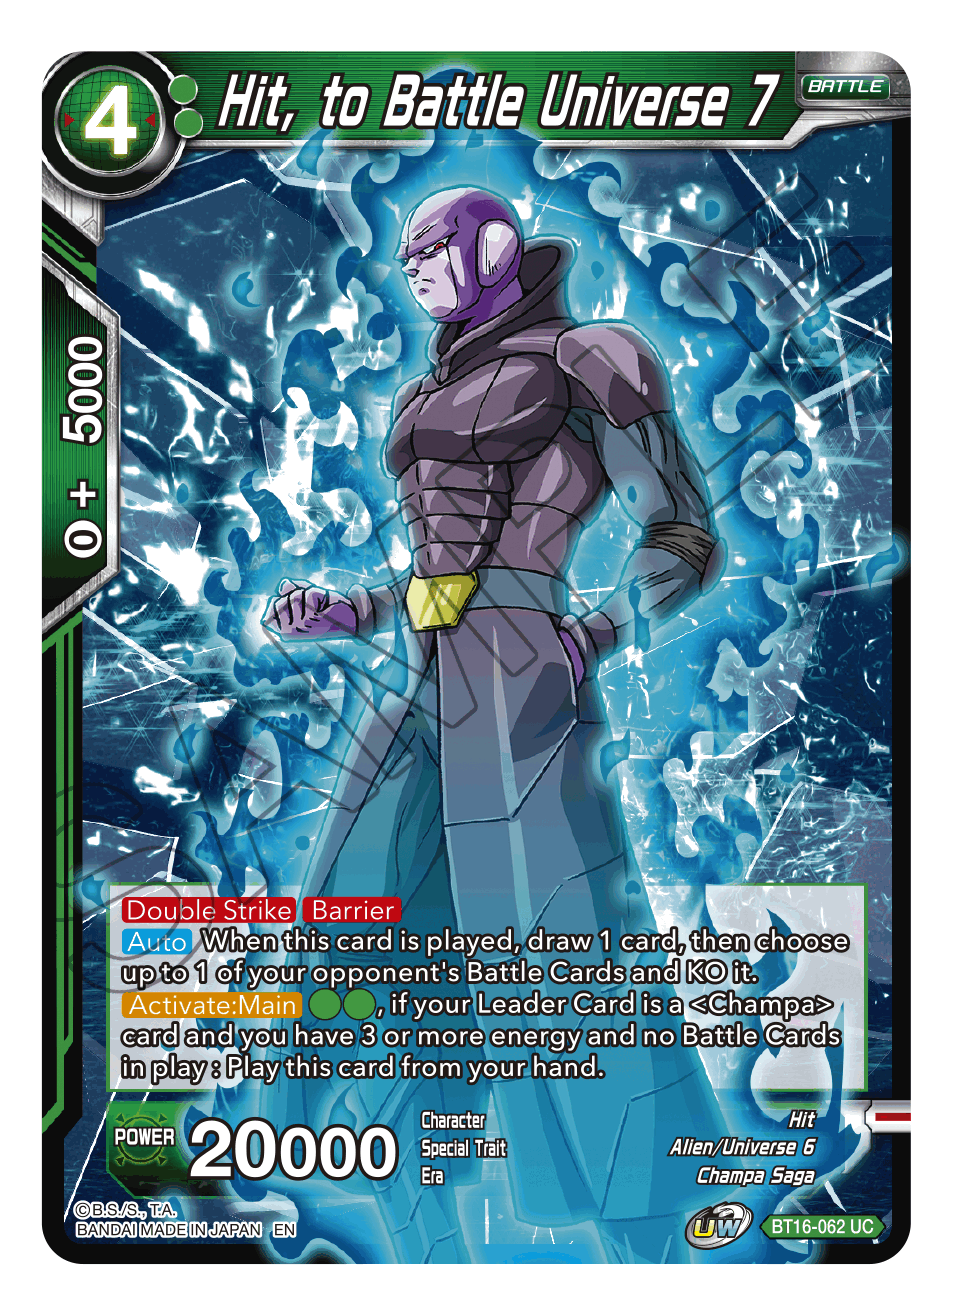 Hit, to Battle Universe 7 - Realm of the Gods - Uncommon - BT16-062